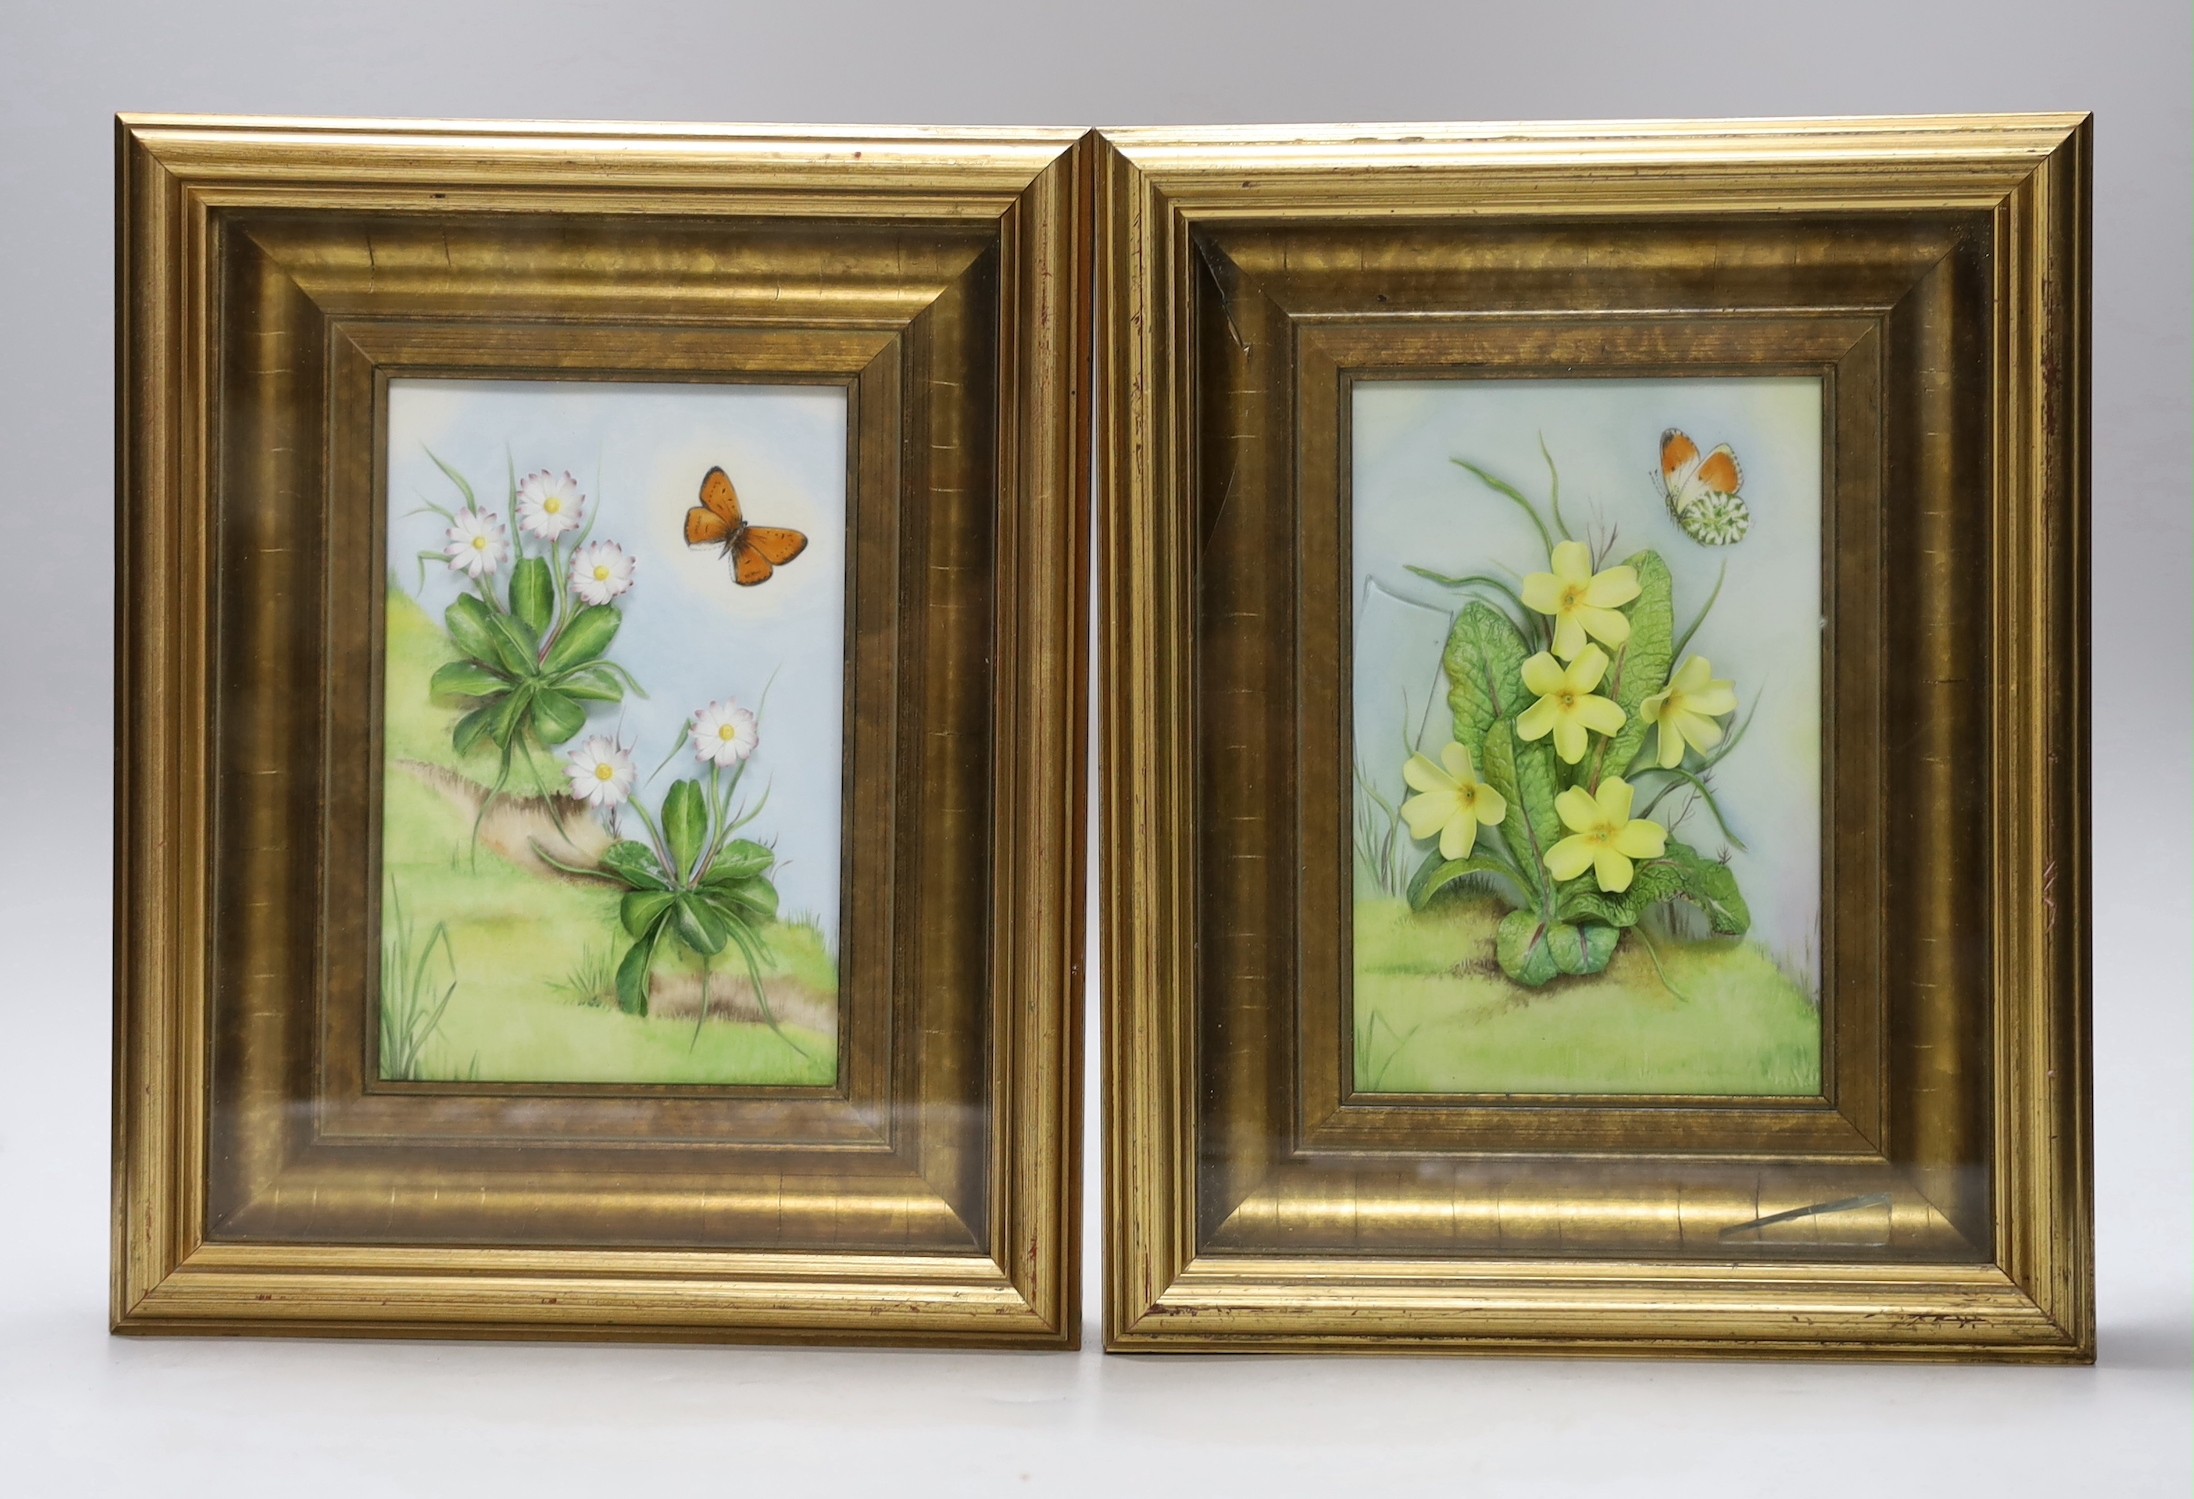 A pair of framed Connoisseur of Malvern, ‘Shakespeare’s Flower Daisies’, bone china plaques, 7cms